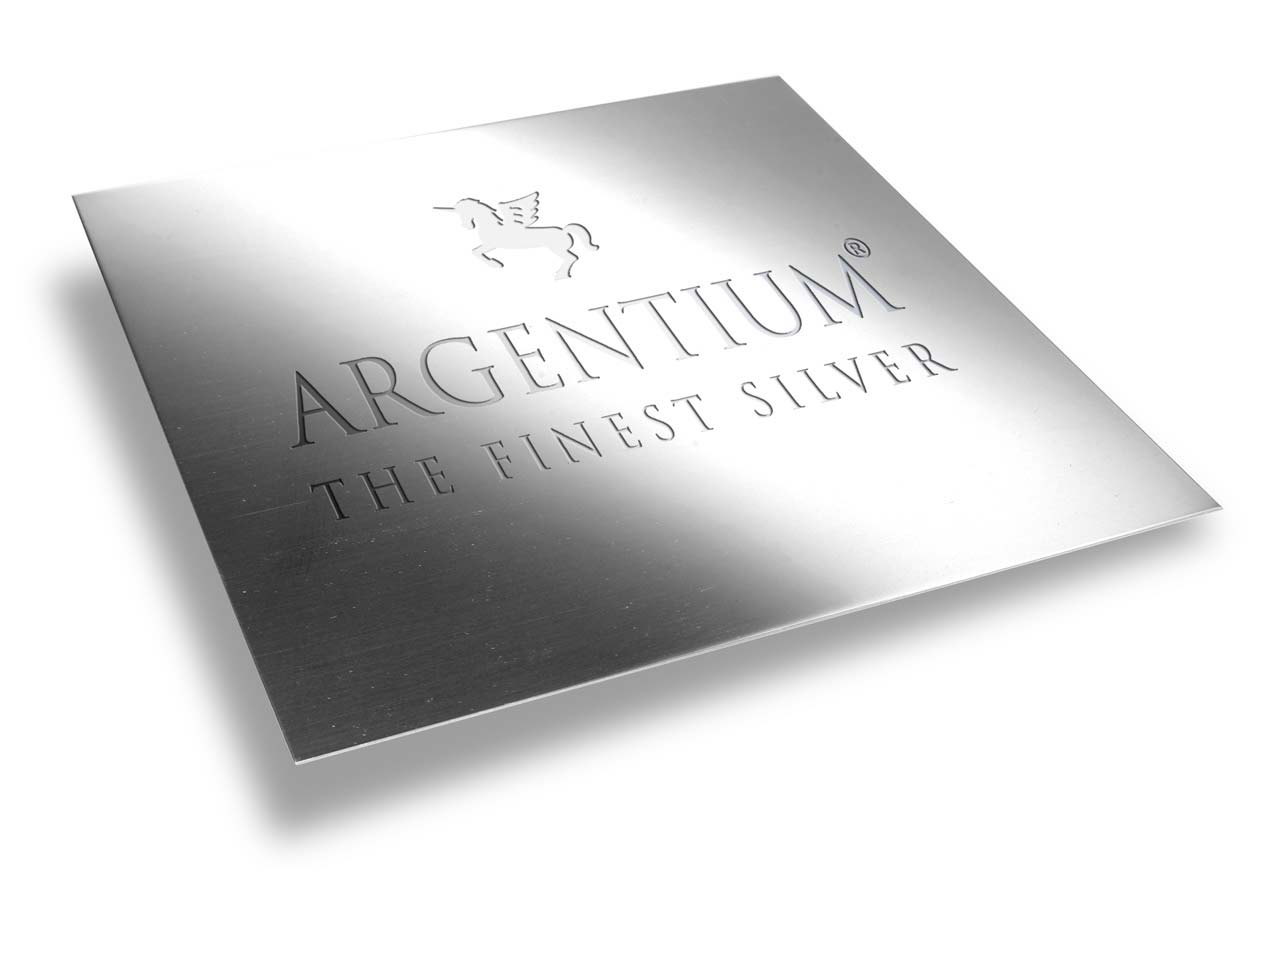 What is the best way to care for Argentium Silver pieces?